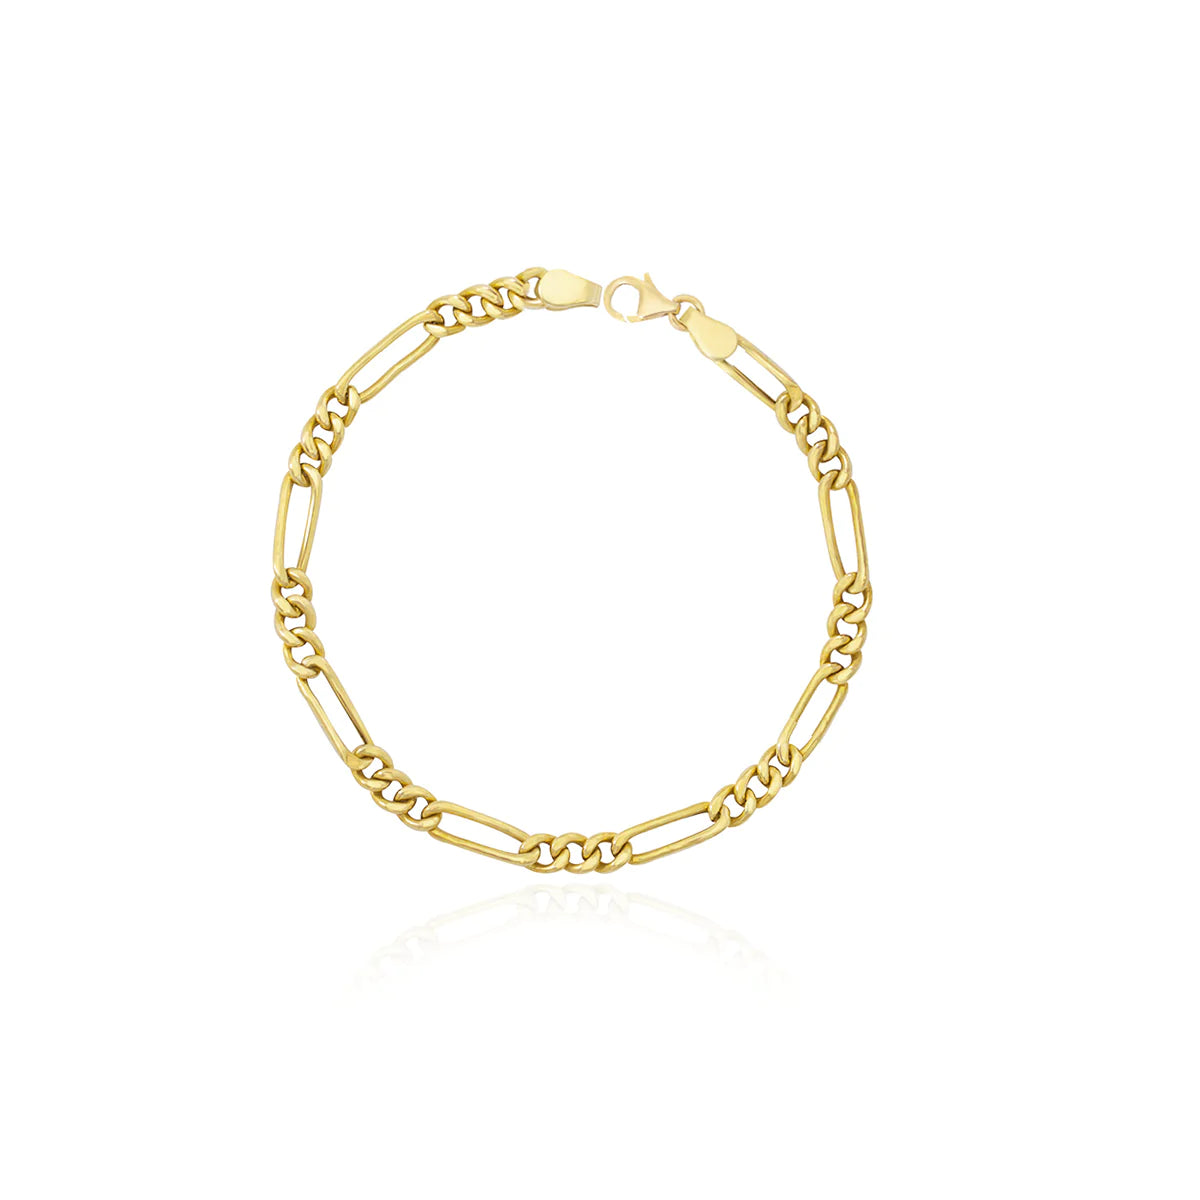 Paperclip Chain Link Bracelet in 18k Yellow Gold